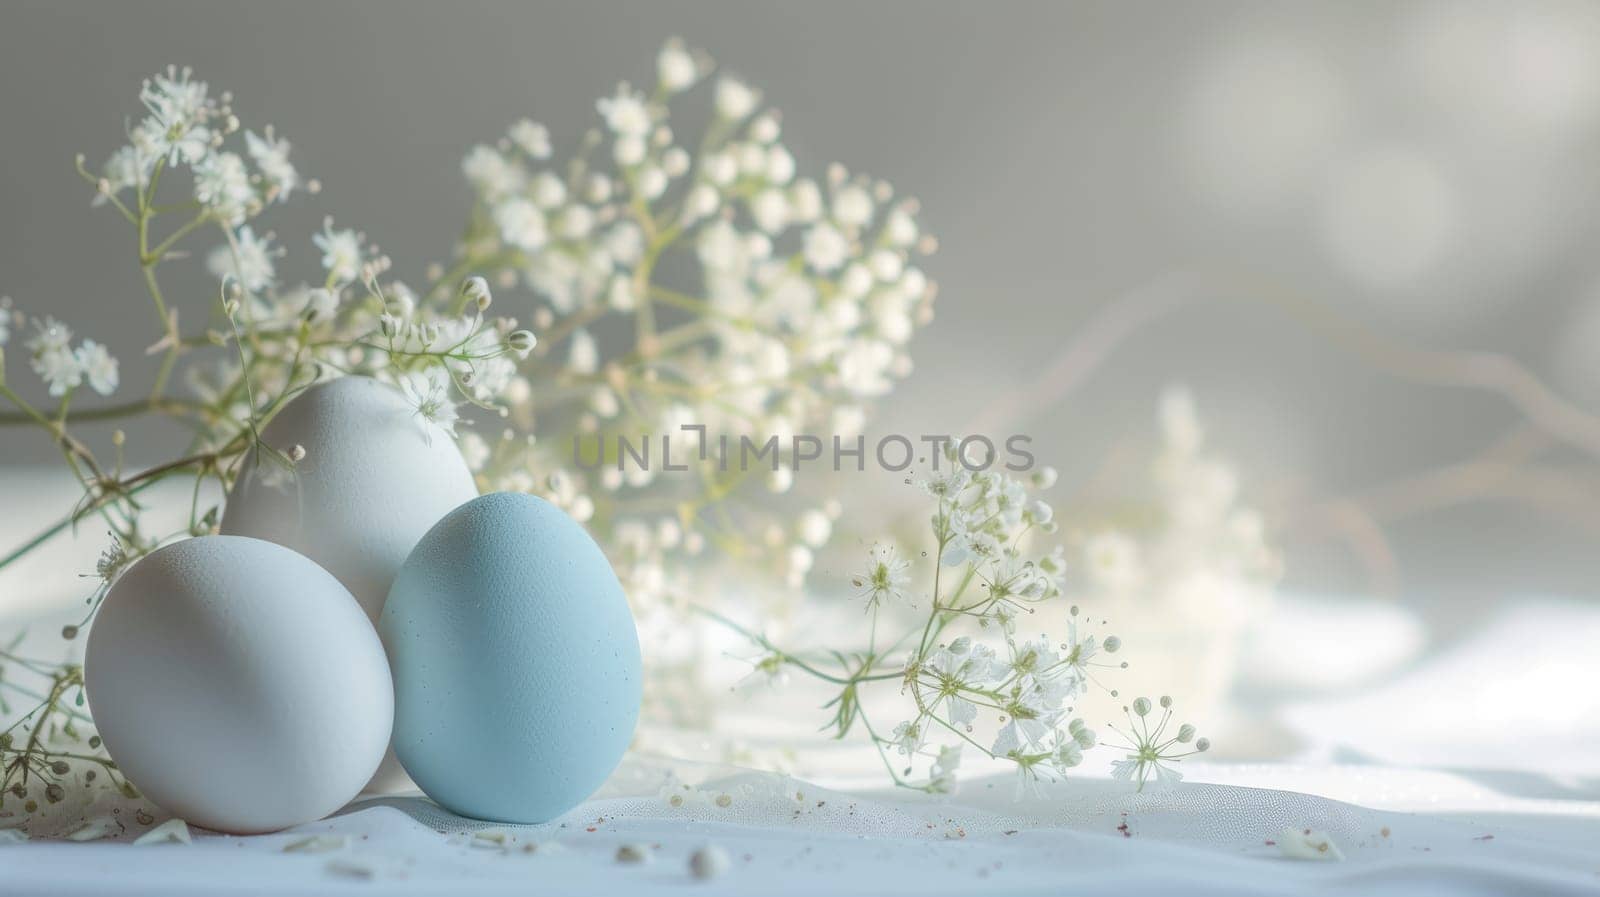 Blue Easter Eggs with White Polka Dots on Light Blue Background. Easter eggs by JuliaDorian